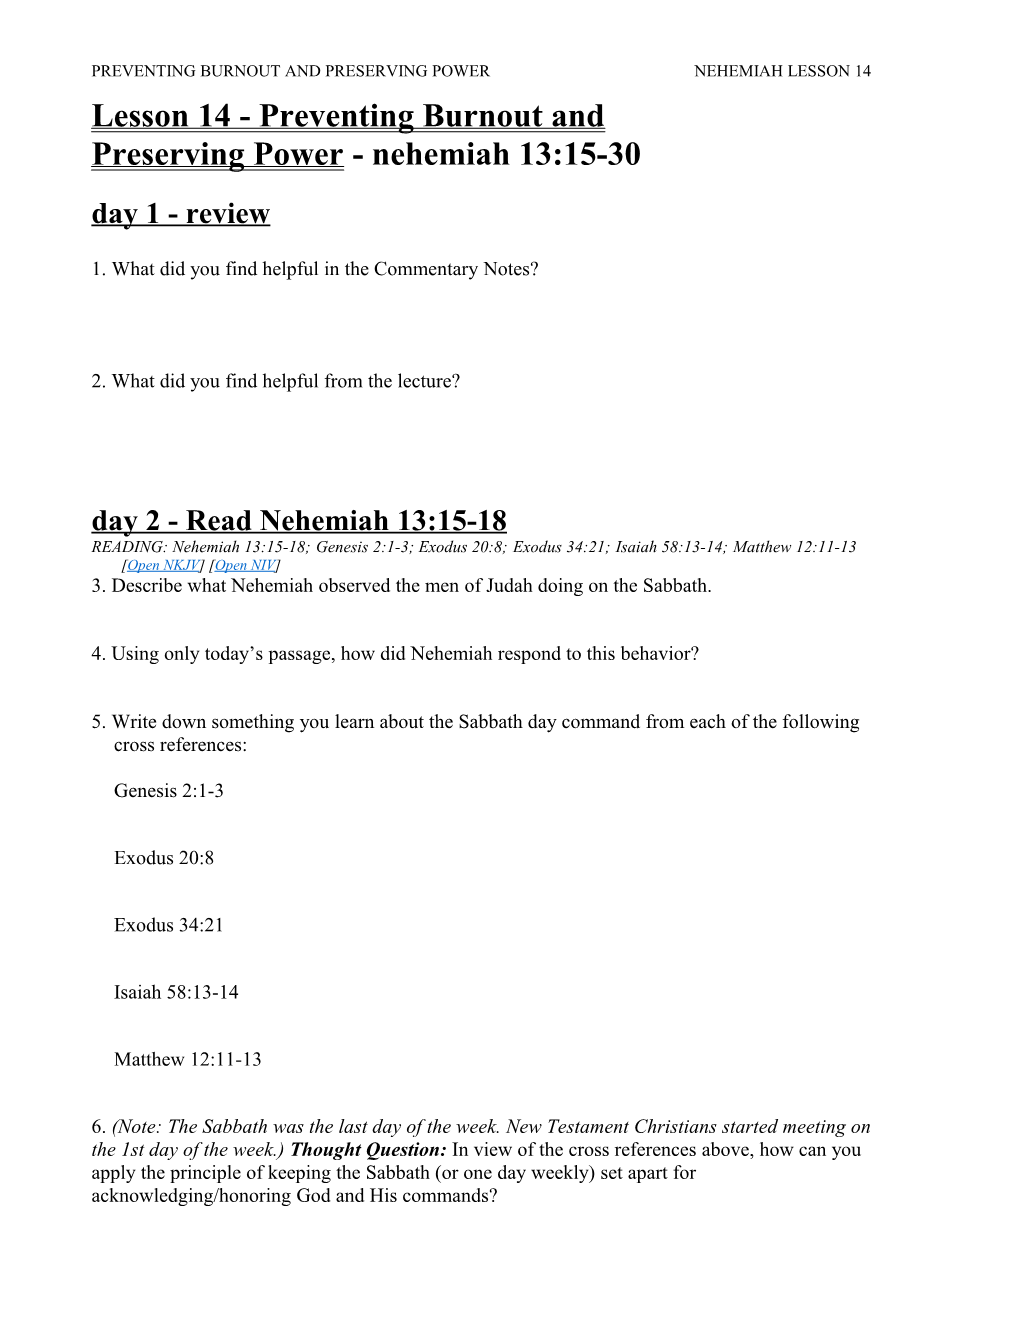 Preventing Burnout and Preserving Powernehemiah Lesson 14